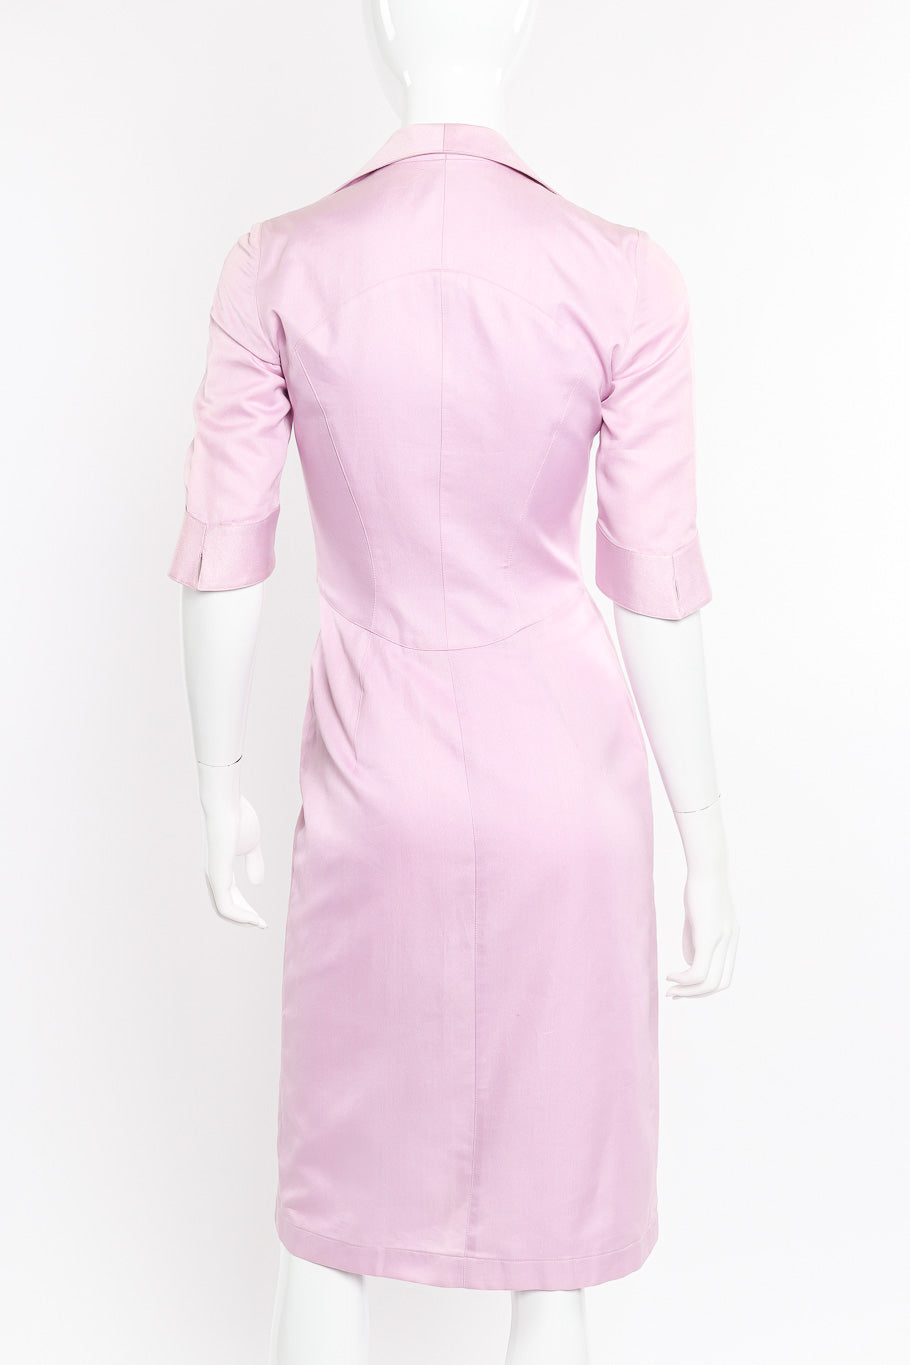 Lilac wrap dress by Thierry Mugler on mannequin back @recessla